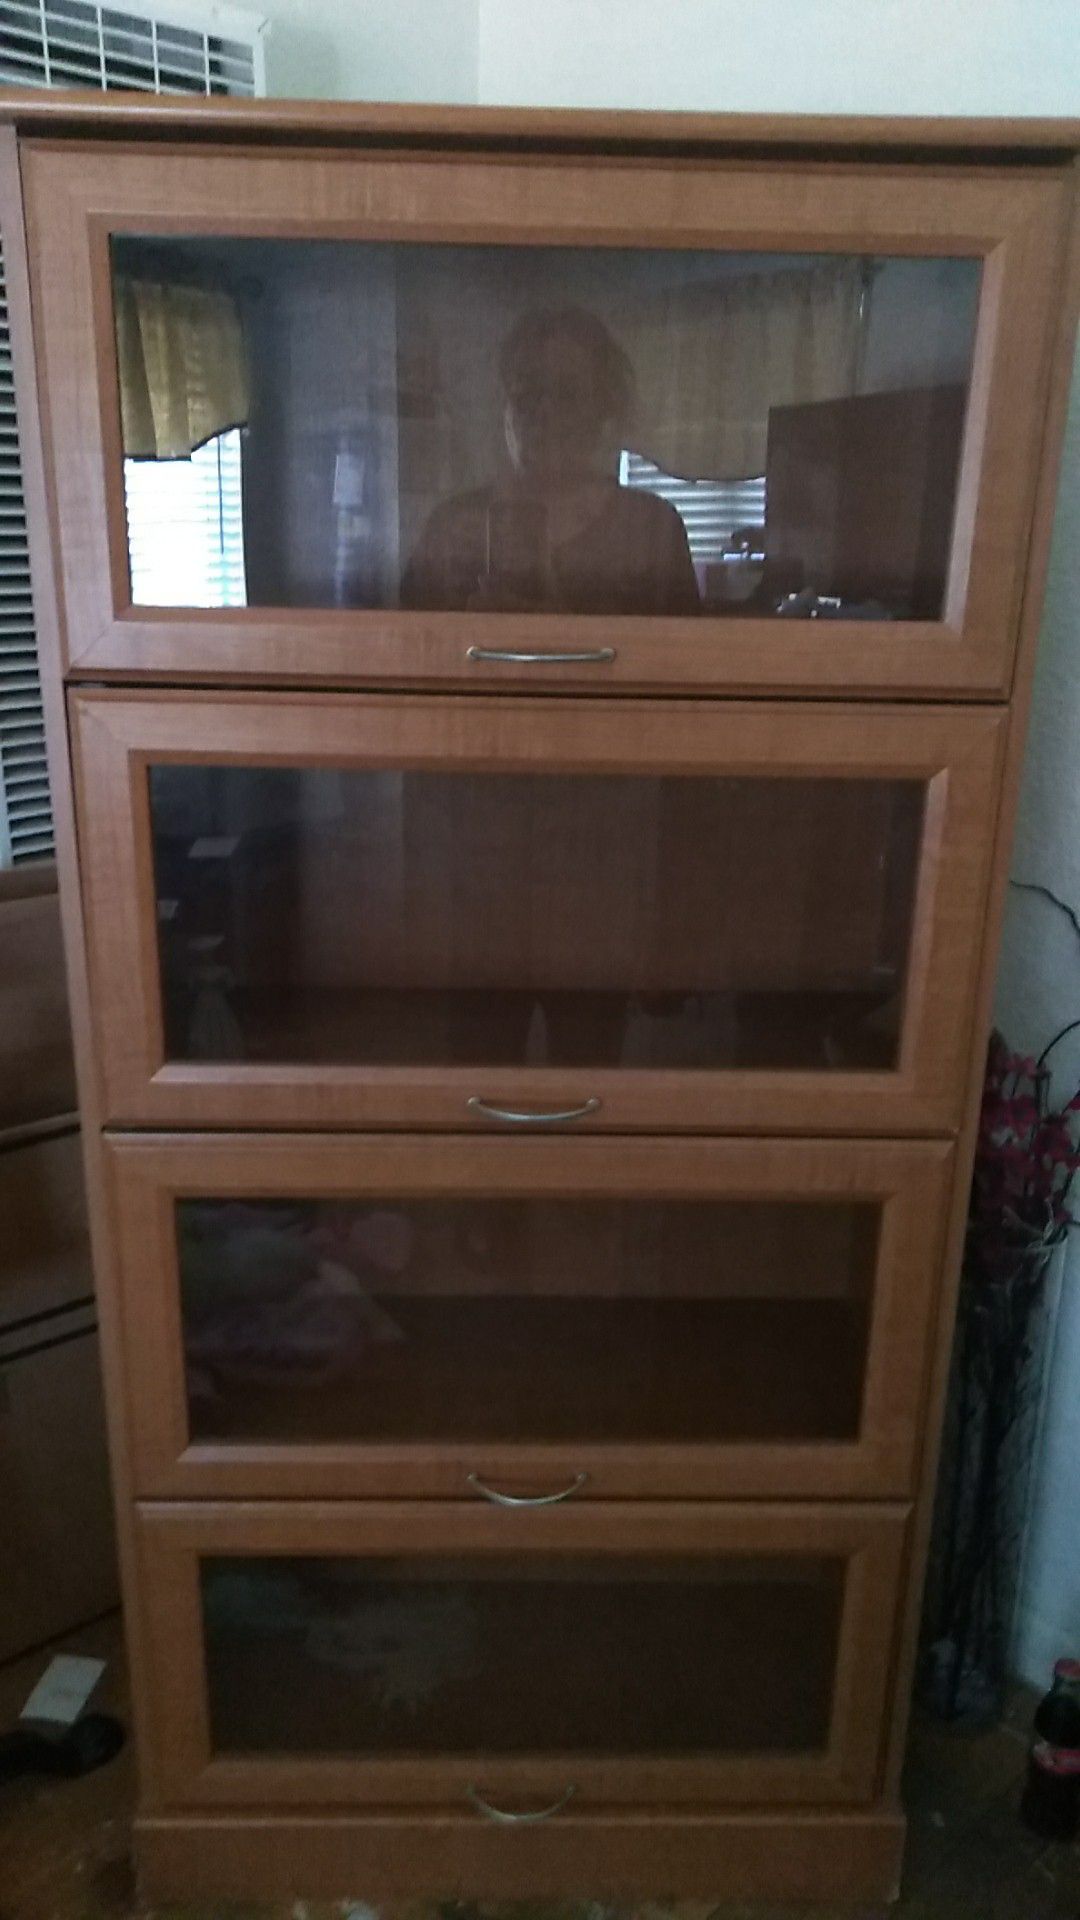 Book case or kitchen cabinet in good condition